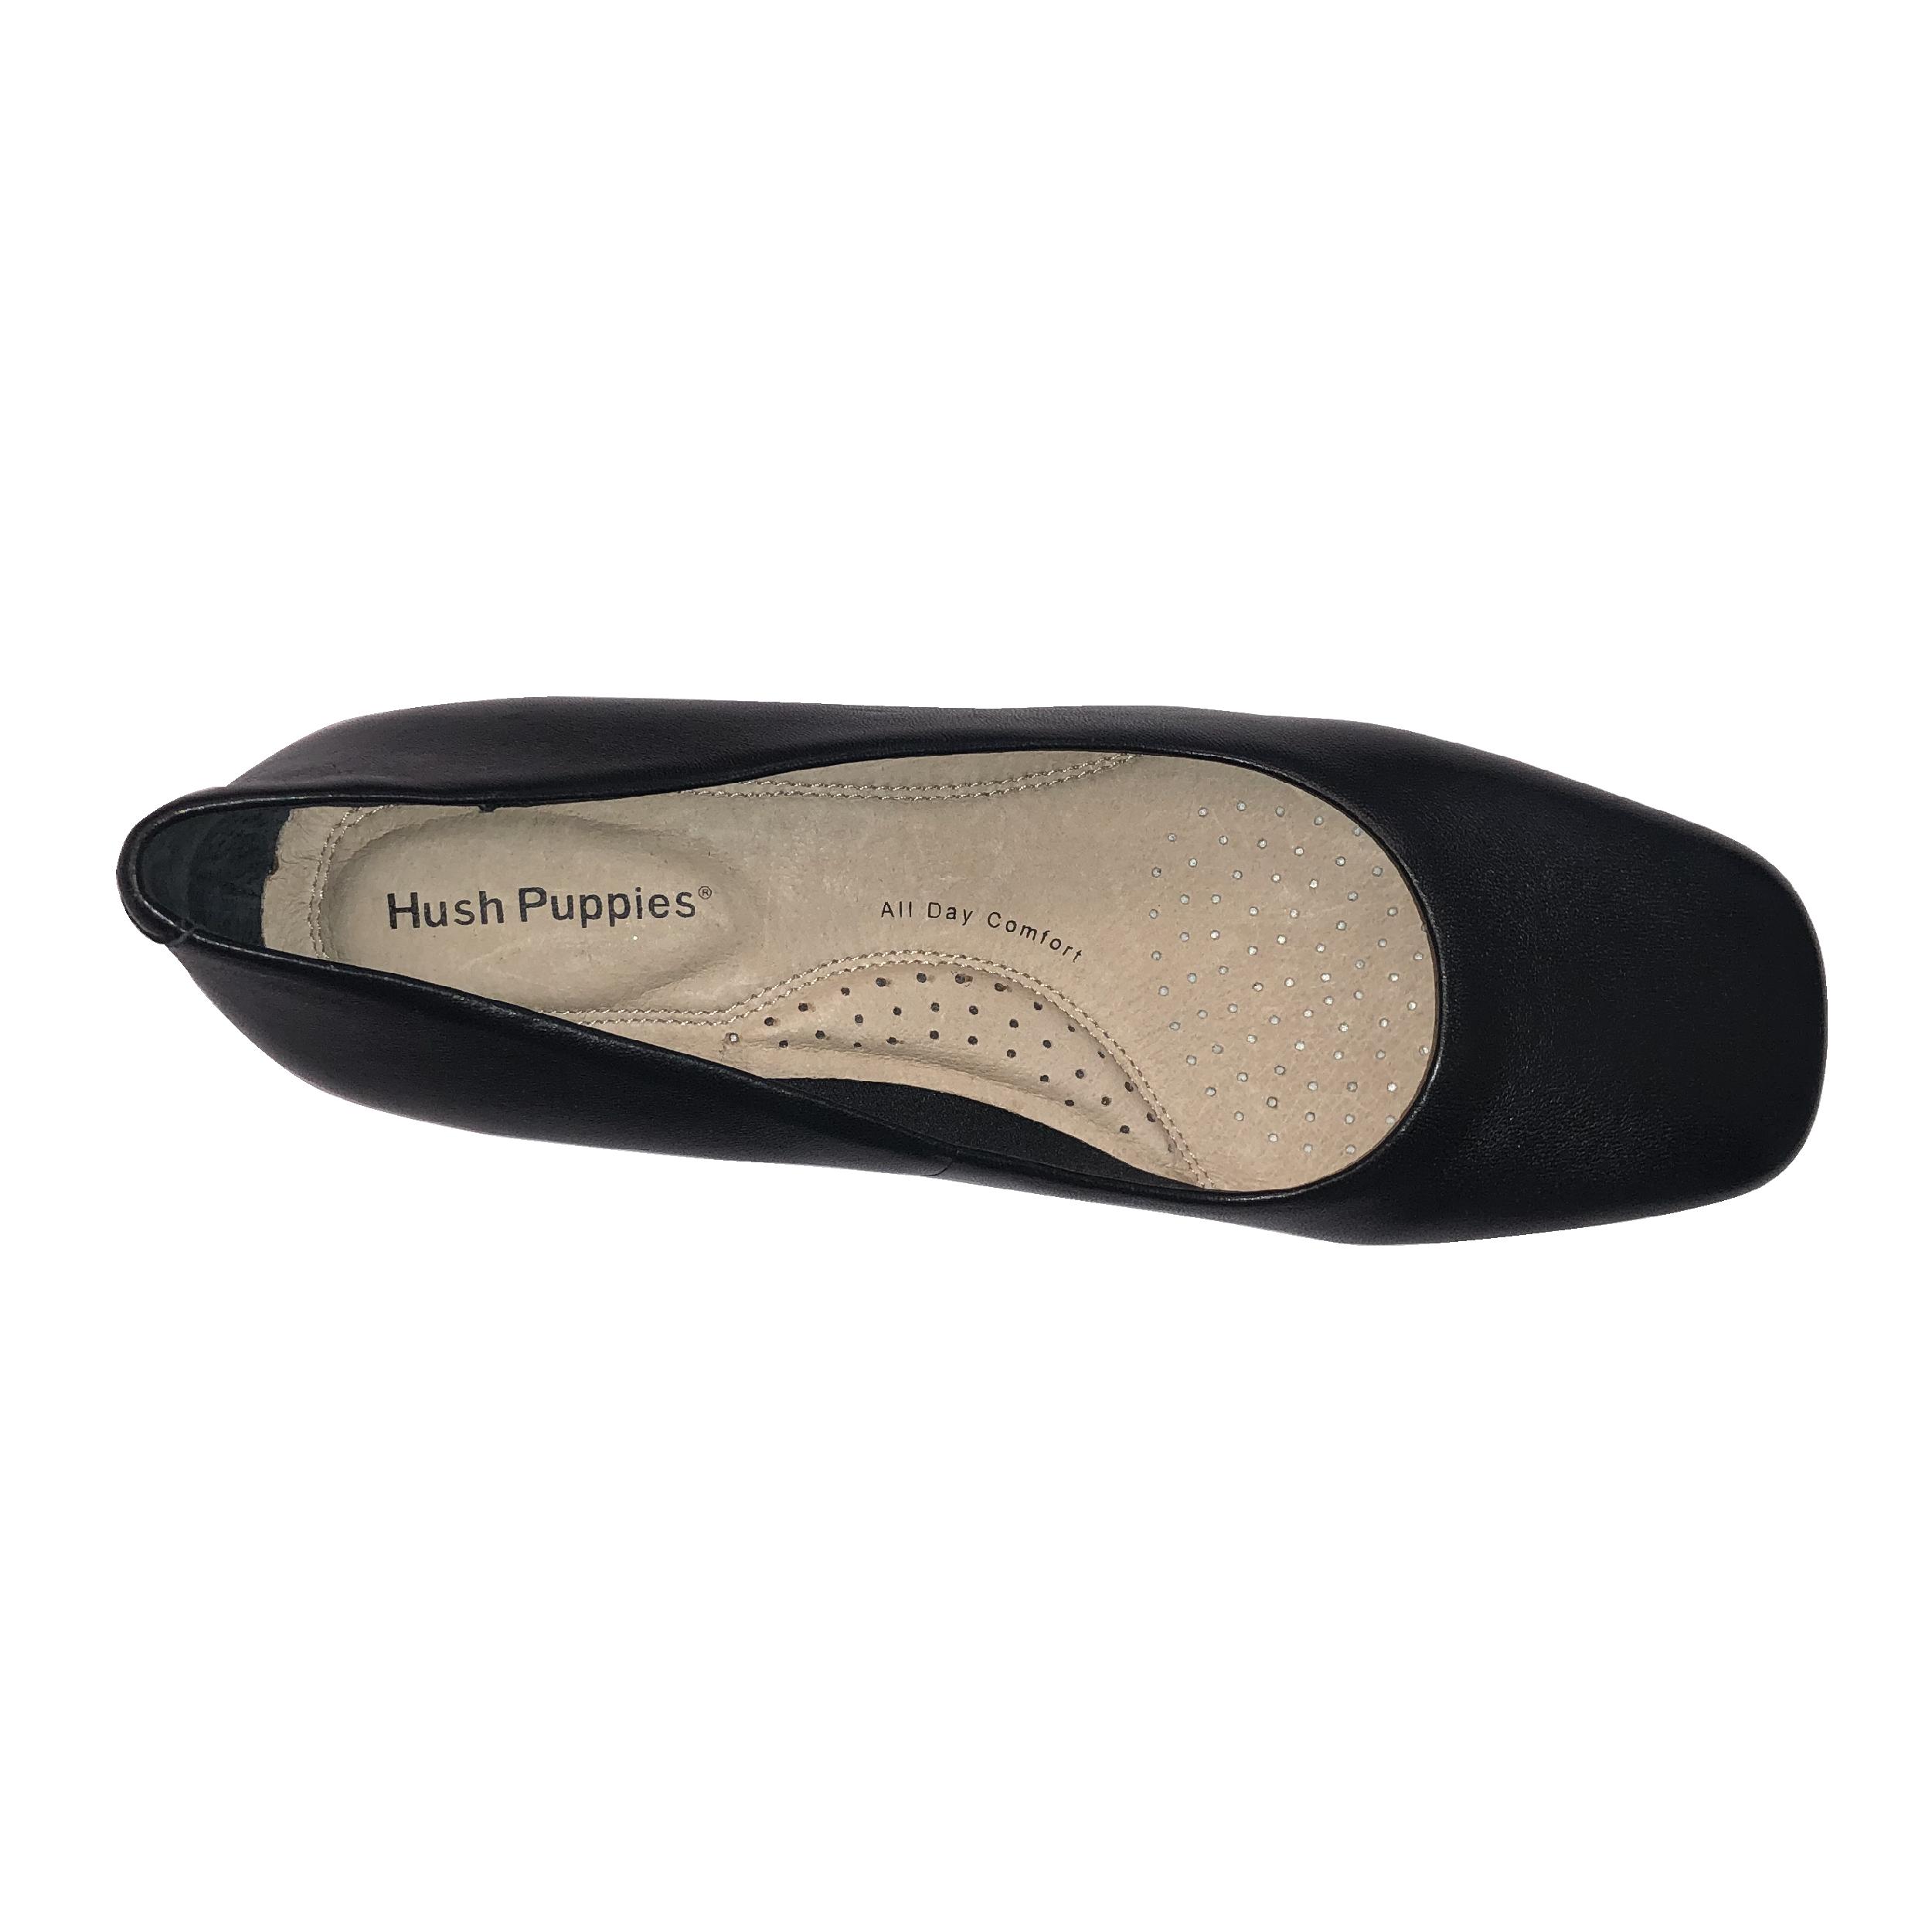 hush puppies female shoes